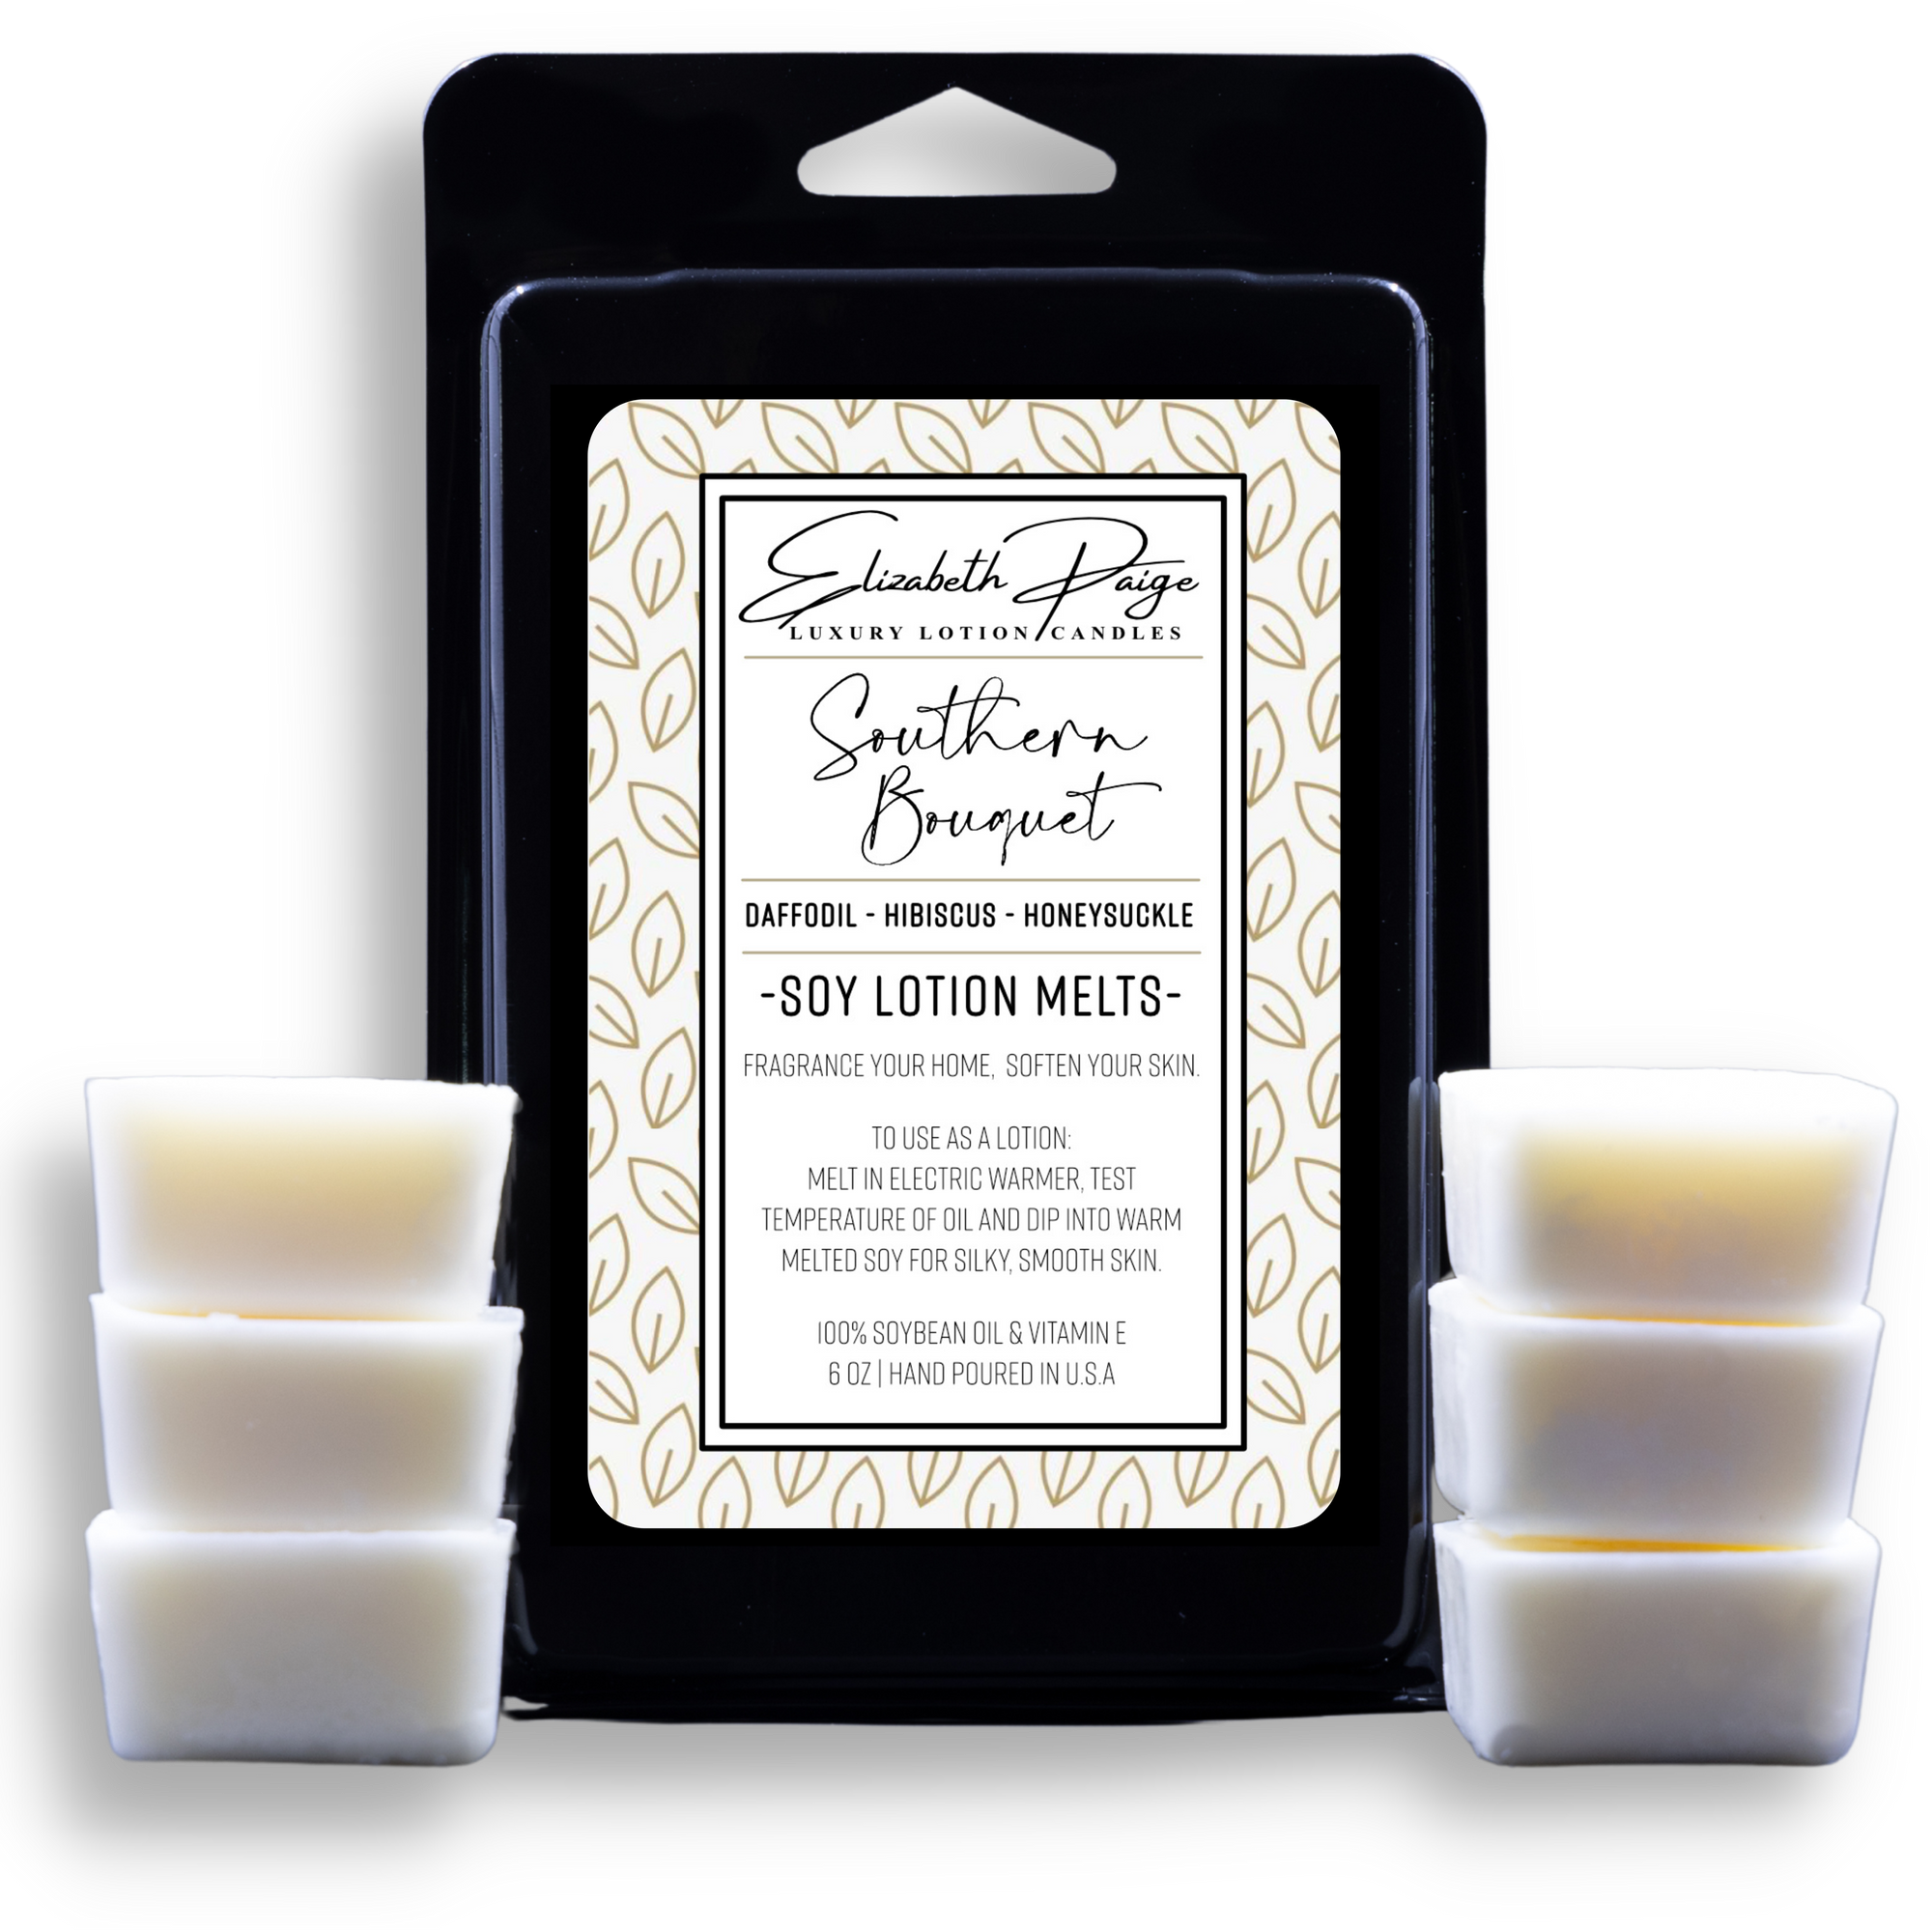 Southern Bouquet Soy Lotion Melts